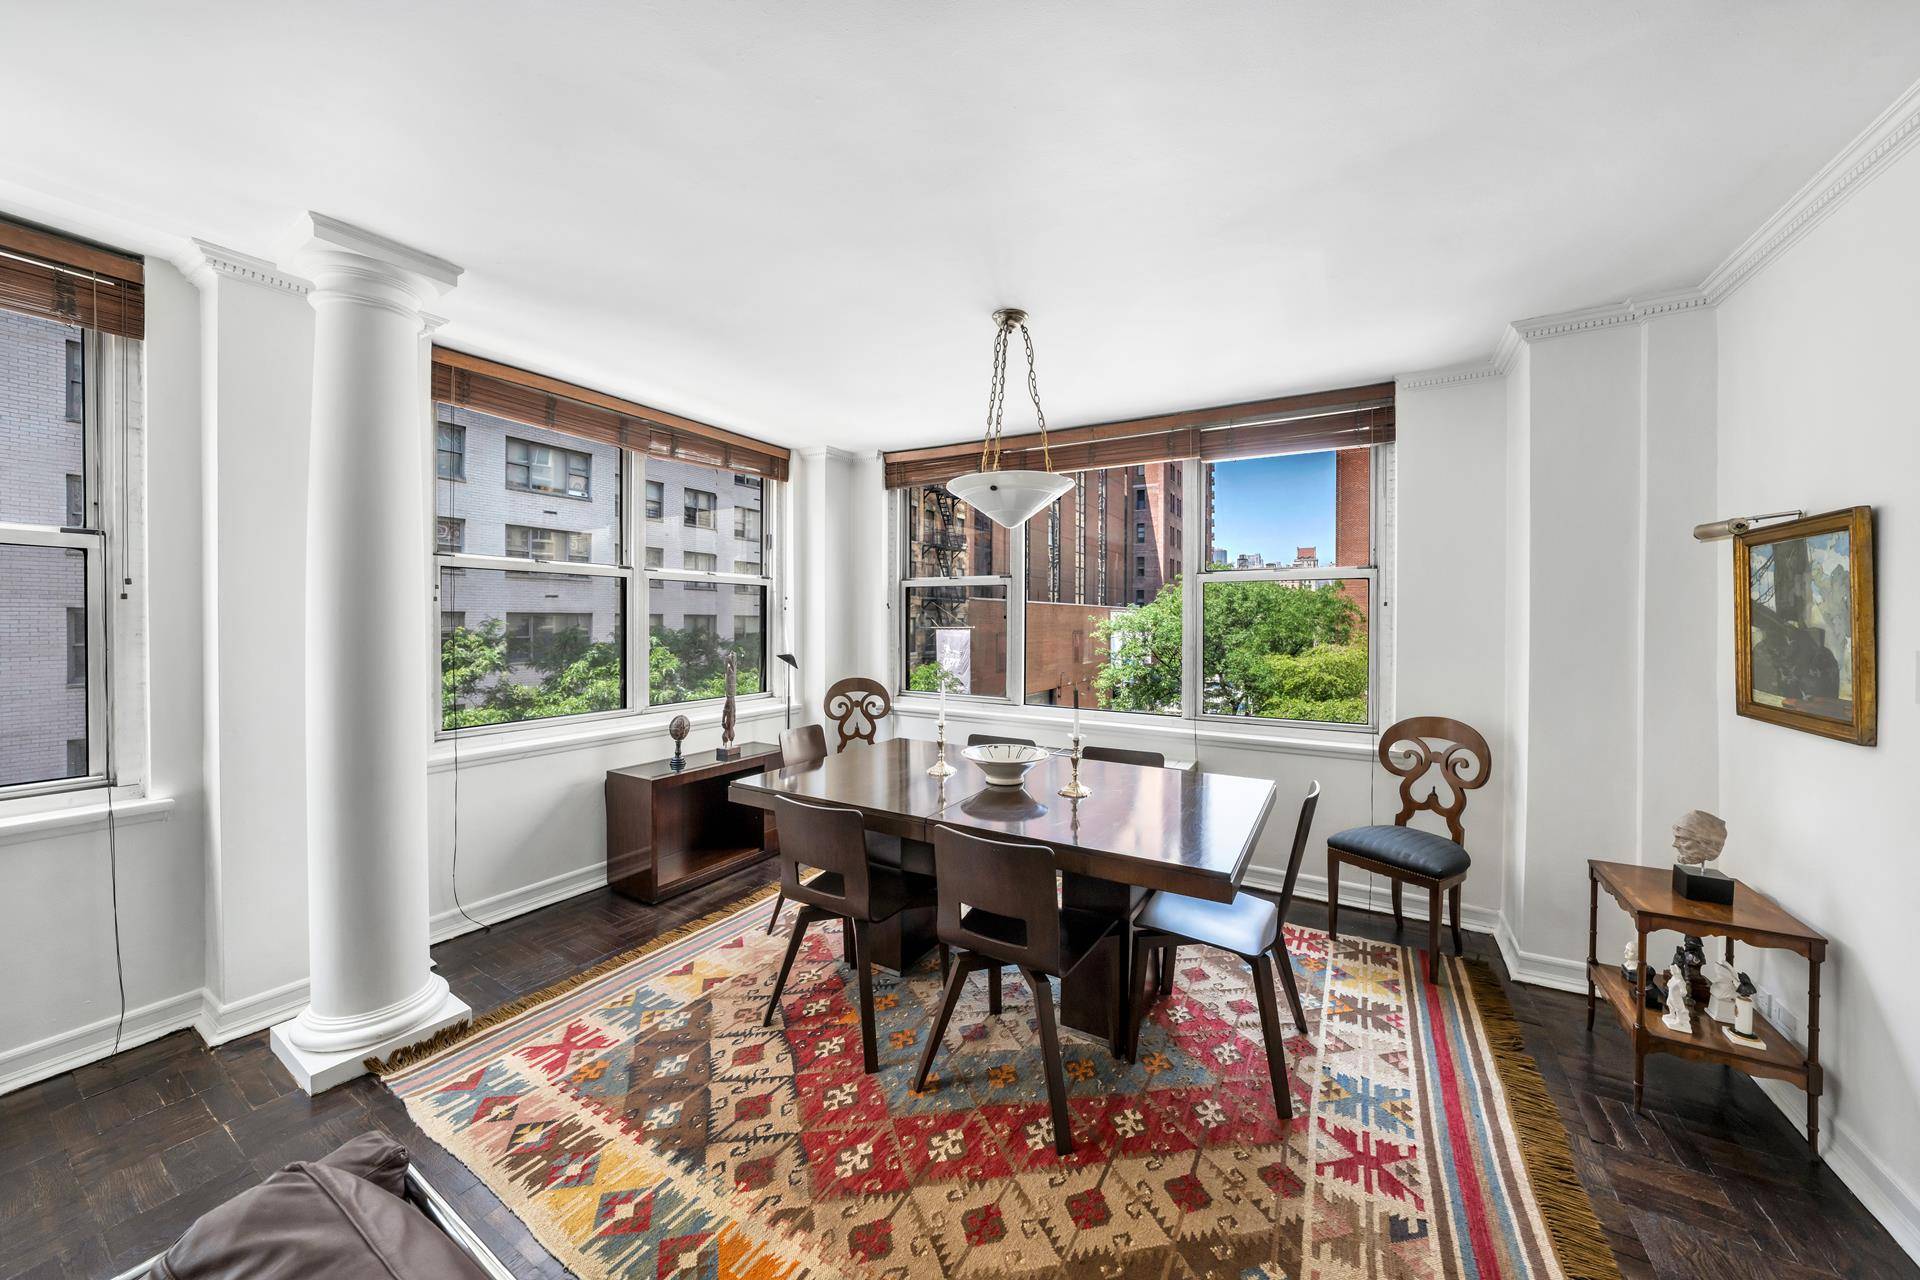 LENOX HILL CONDO ! This expansive, handsome over sized TRUE 3 bedroom condominium with a perfect split bedroom layout is the one you have been waiting for.